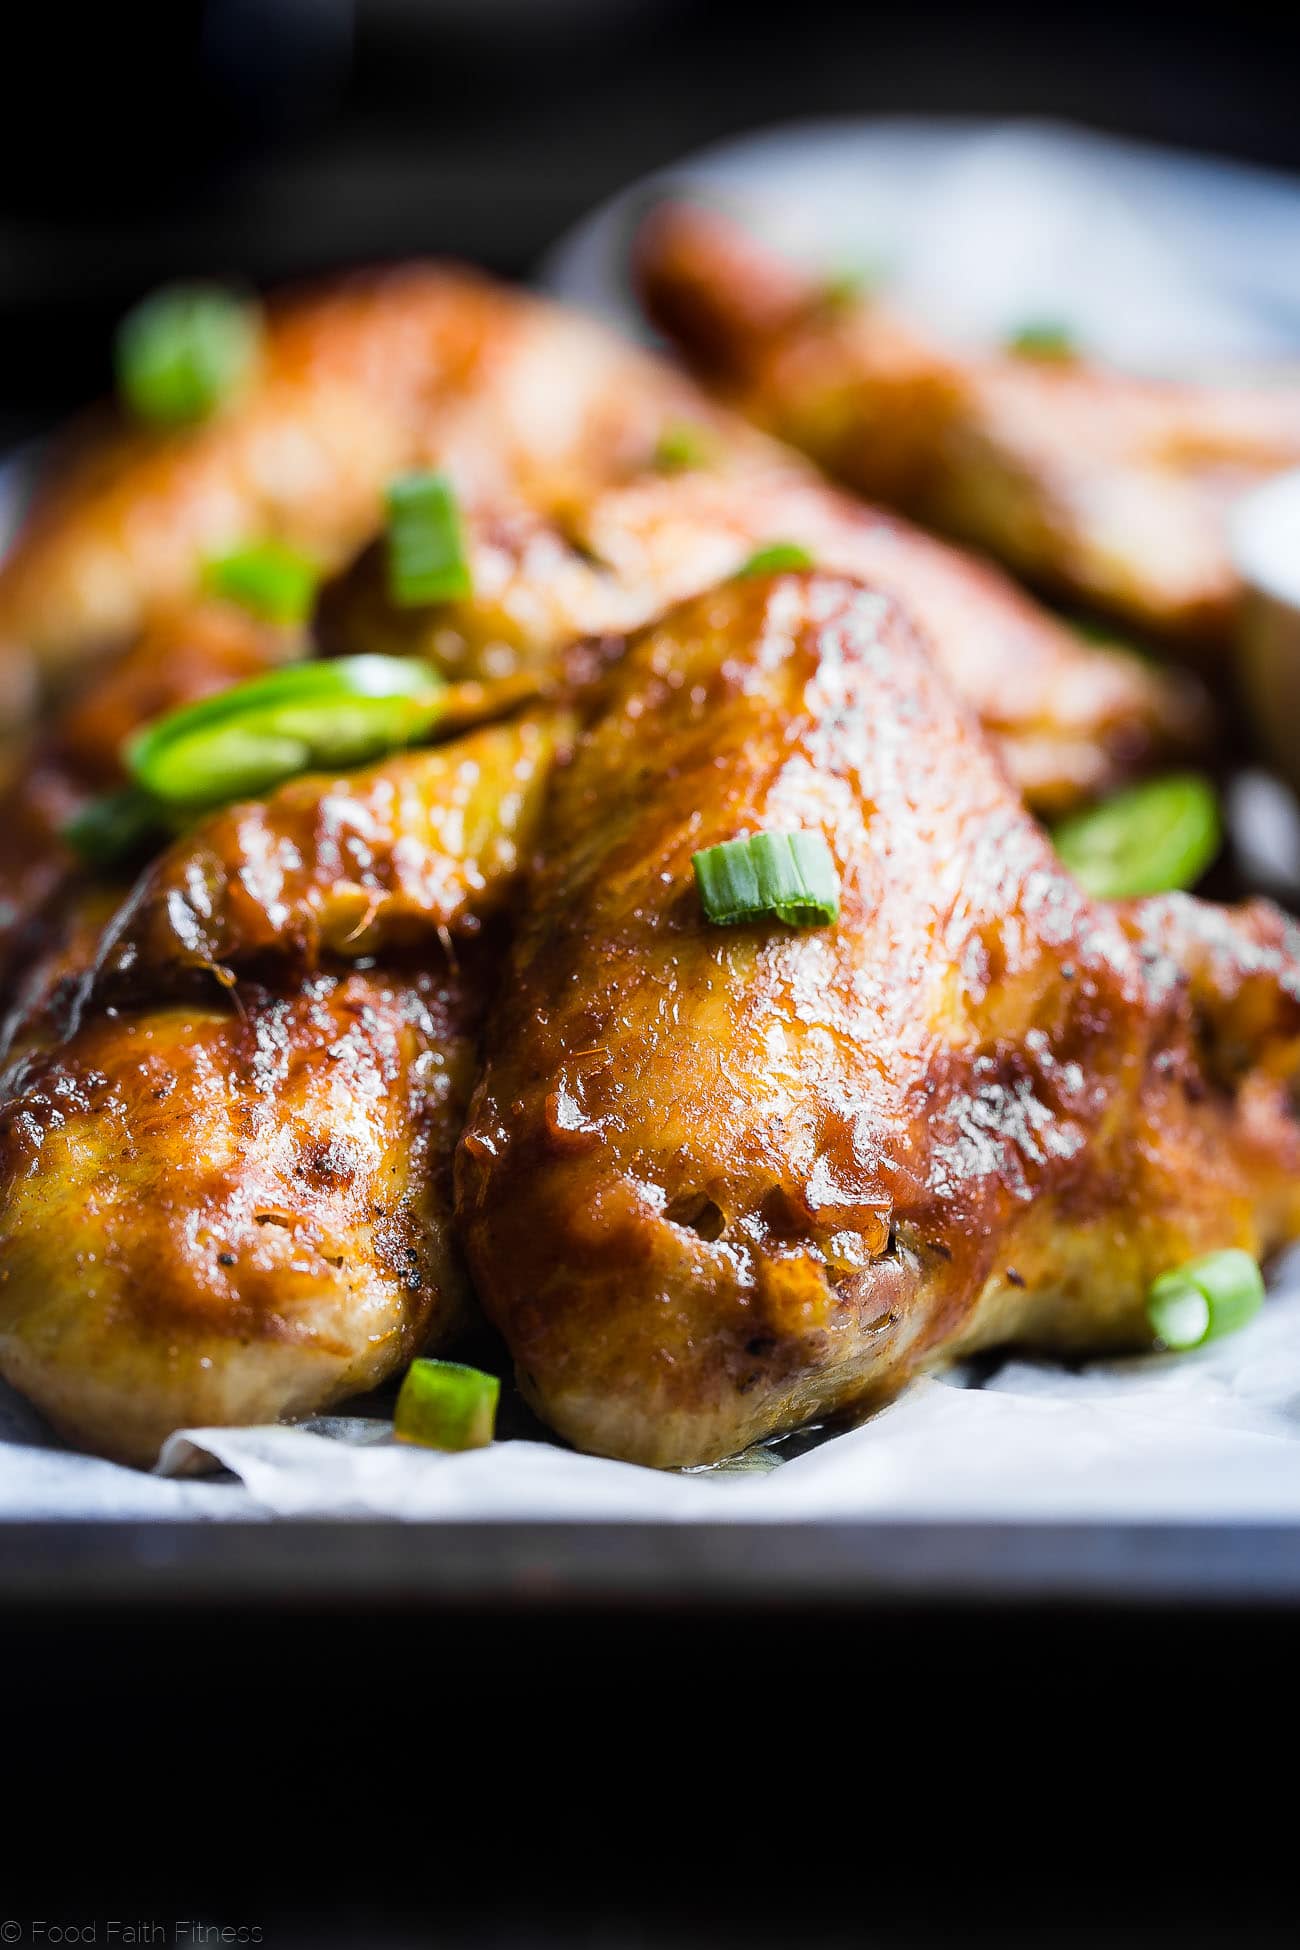 Slow Cooker BBQ Chicken Wings - Let the slow cooker do the work for you with these easy paleo-friendly chicken wings! A healthy, gluten, grain and dairy free, crowd pleasing appetizer for game day! | Foodfaithfitness.com | @FoodFaithFit